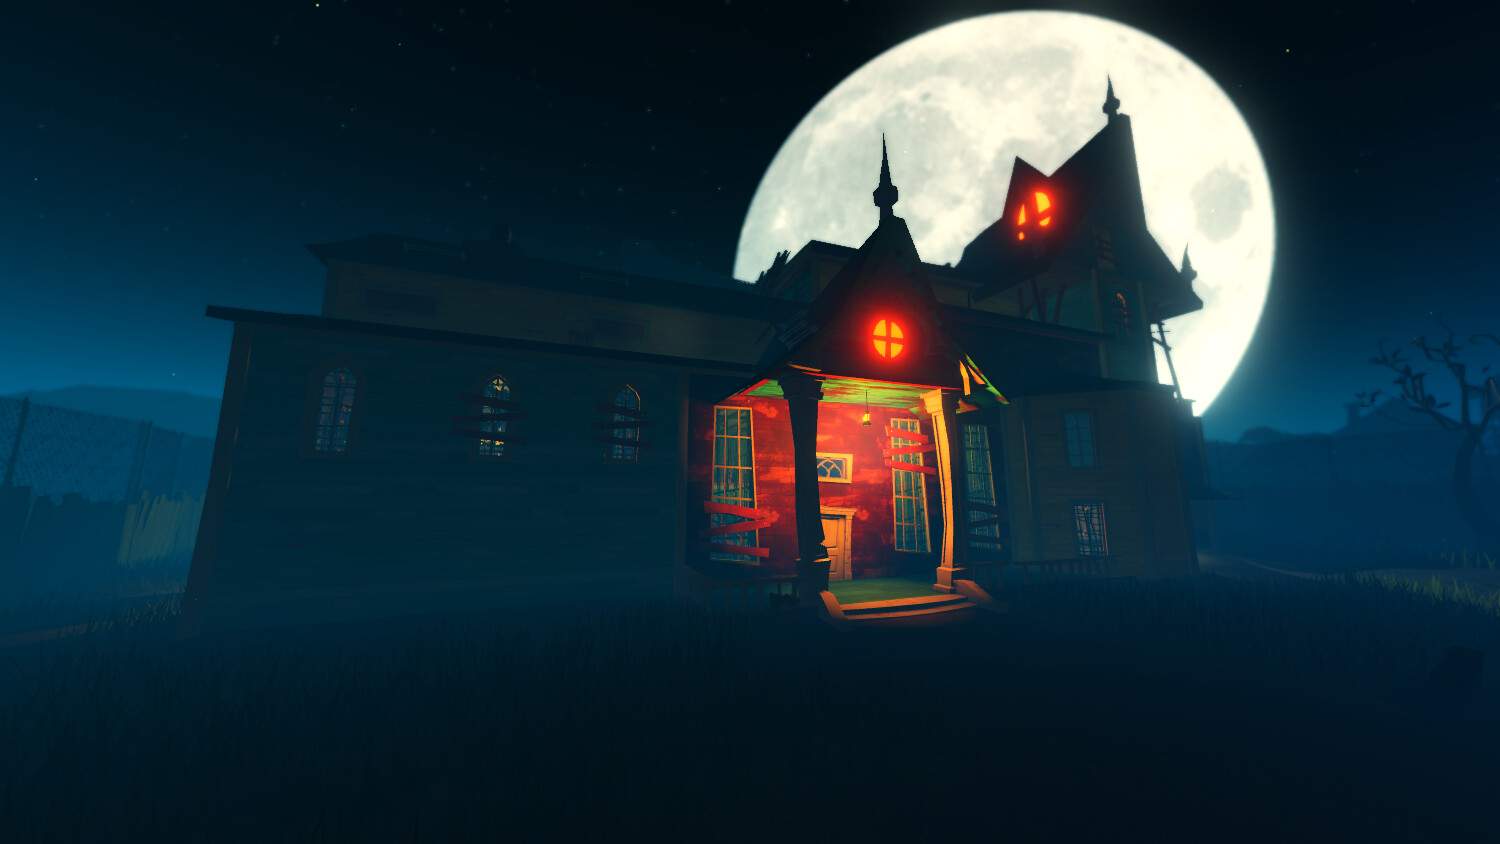 Secret Neighbor is now live on Roblox! Experience social horror